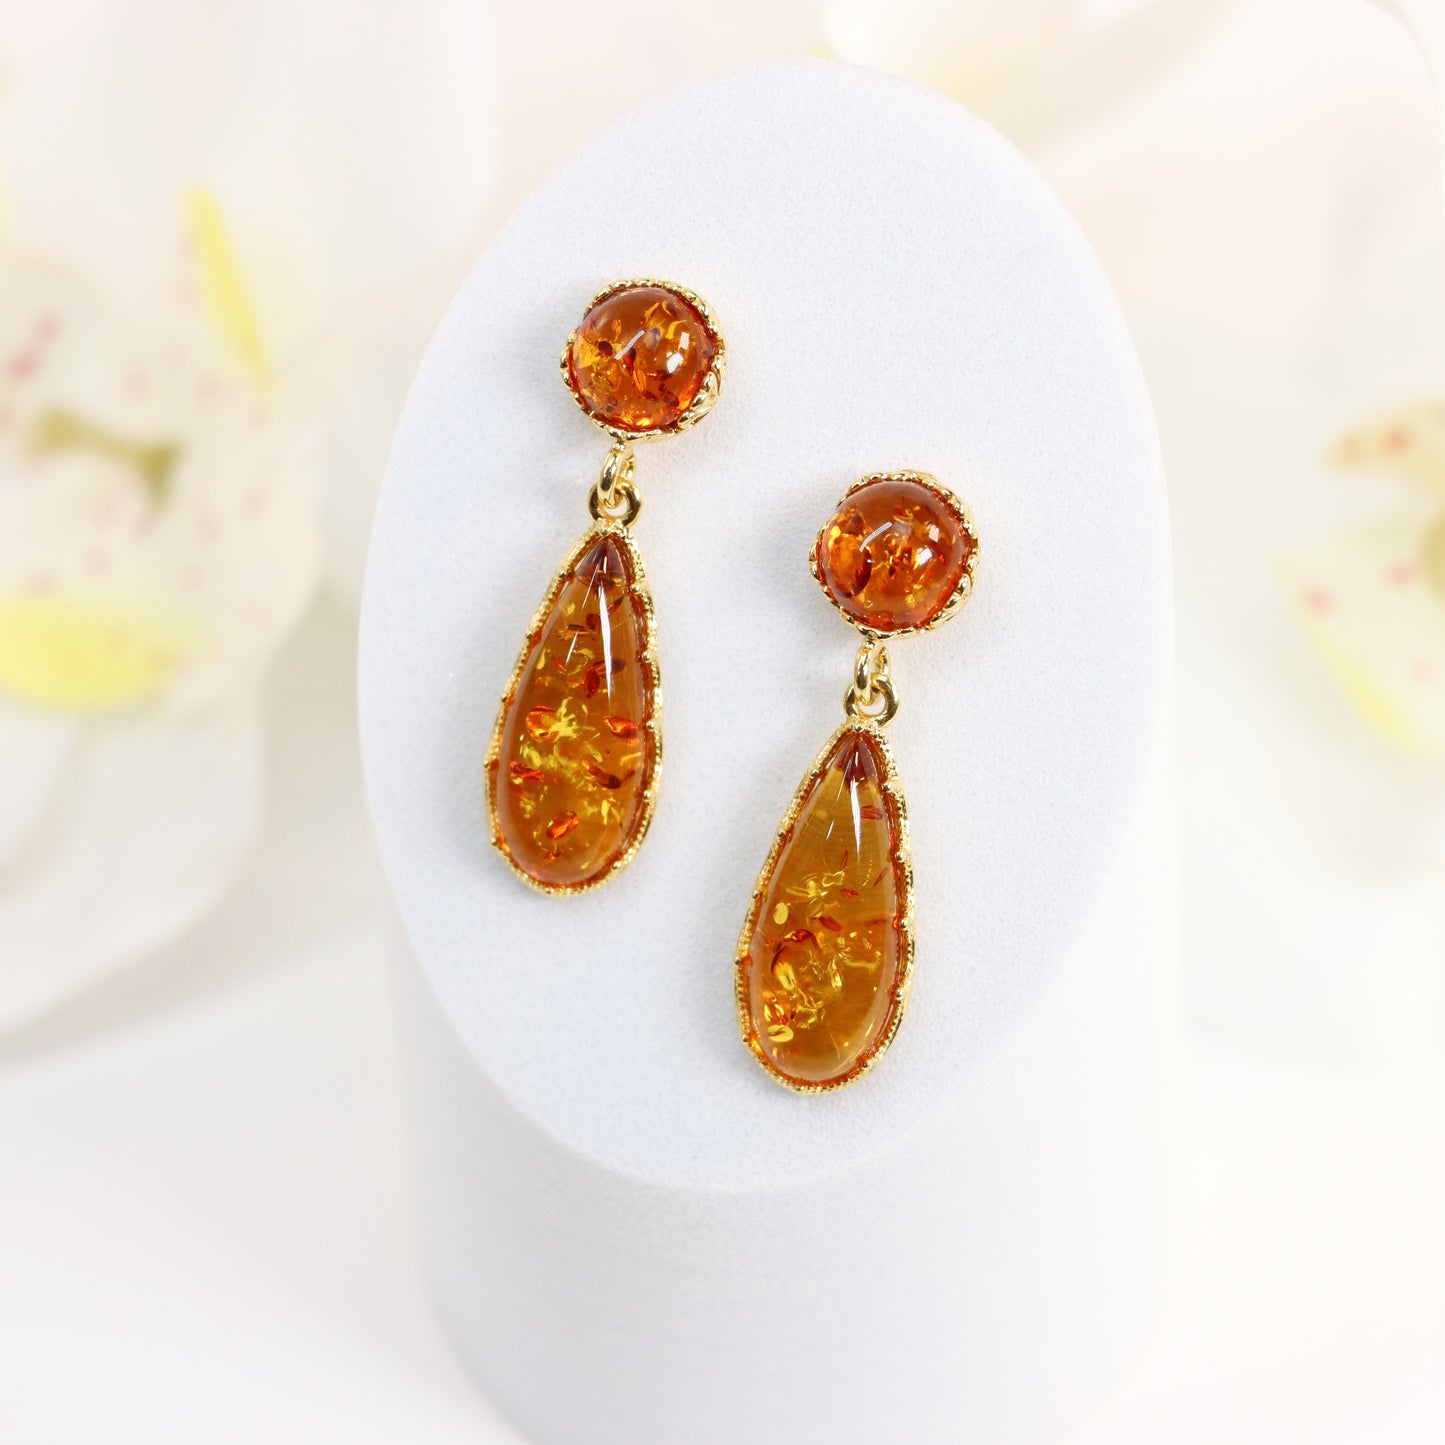 Natural Baltic Cognac Amber Delicate Dangle Earrings in 14k Gold Plated s925